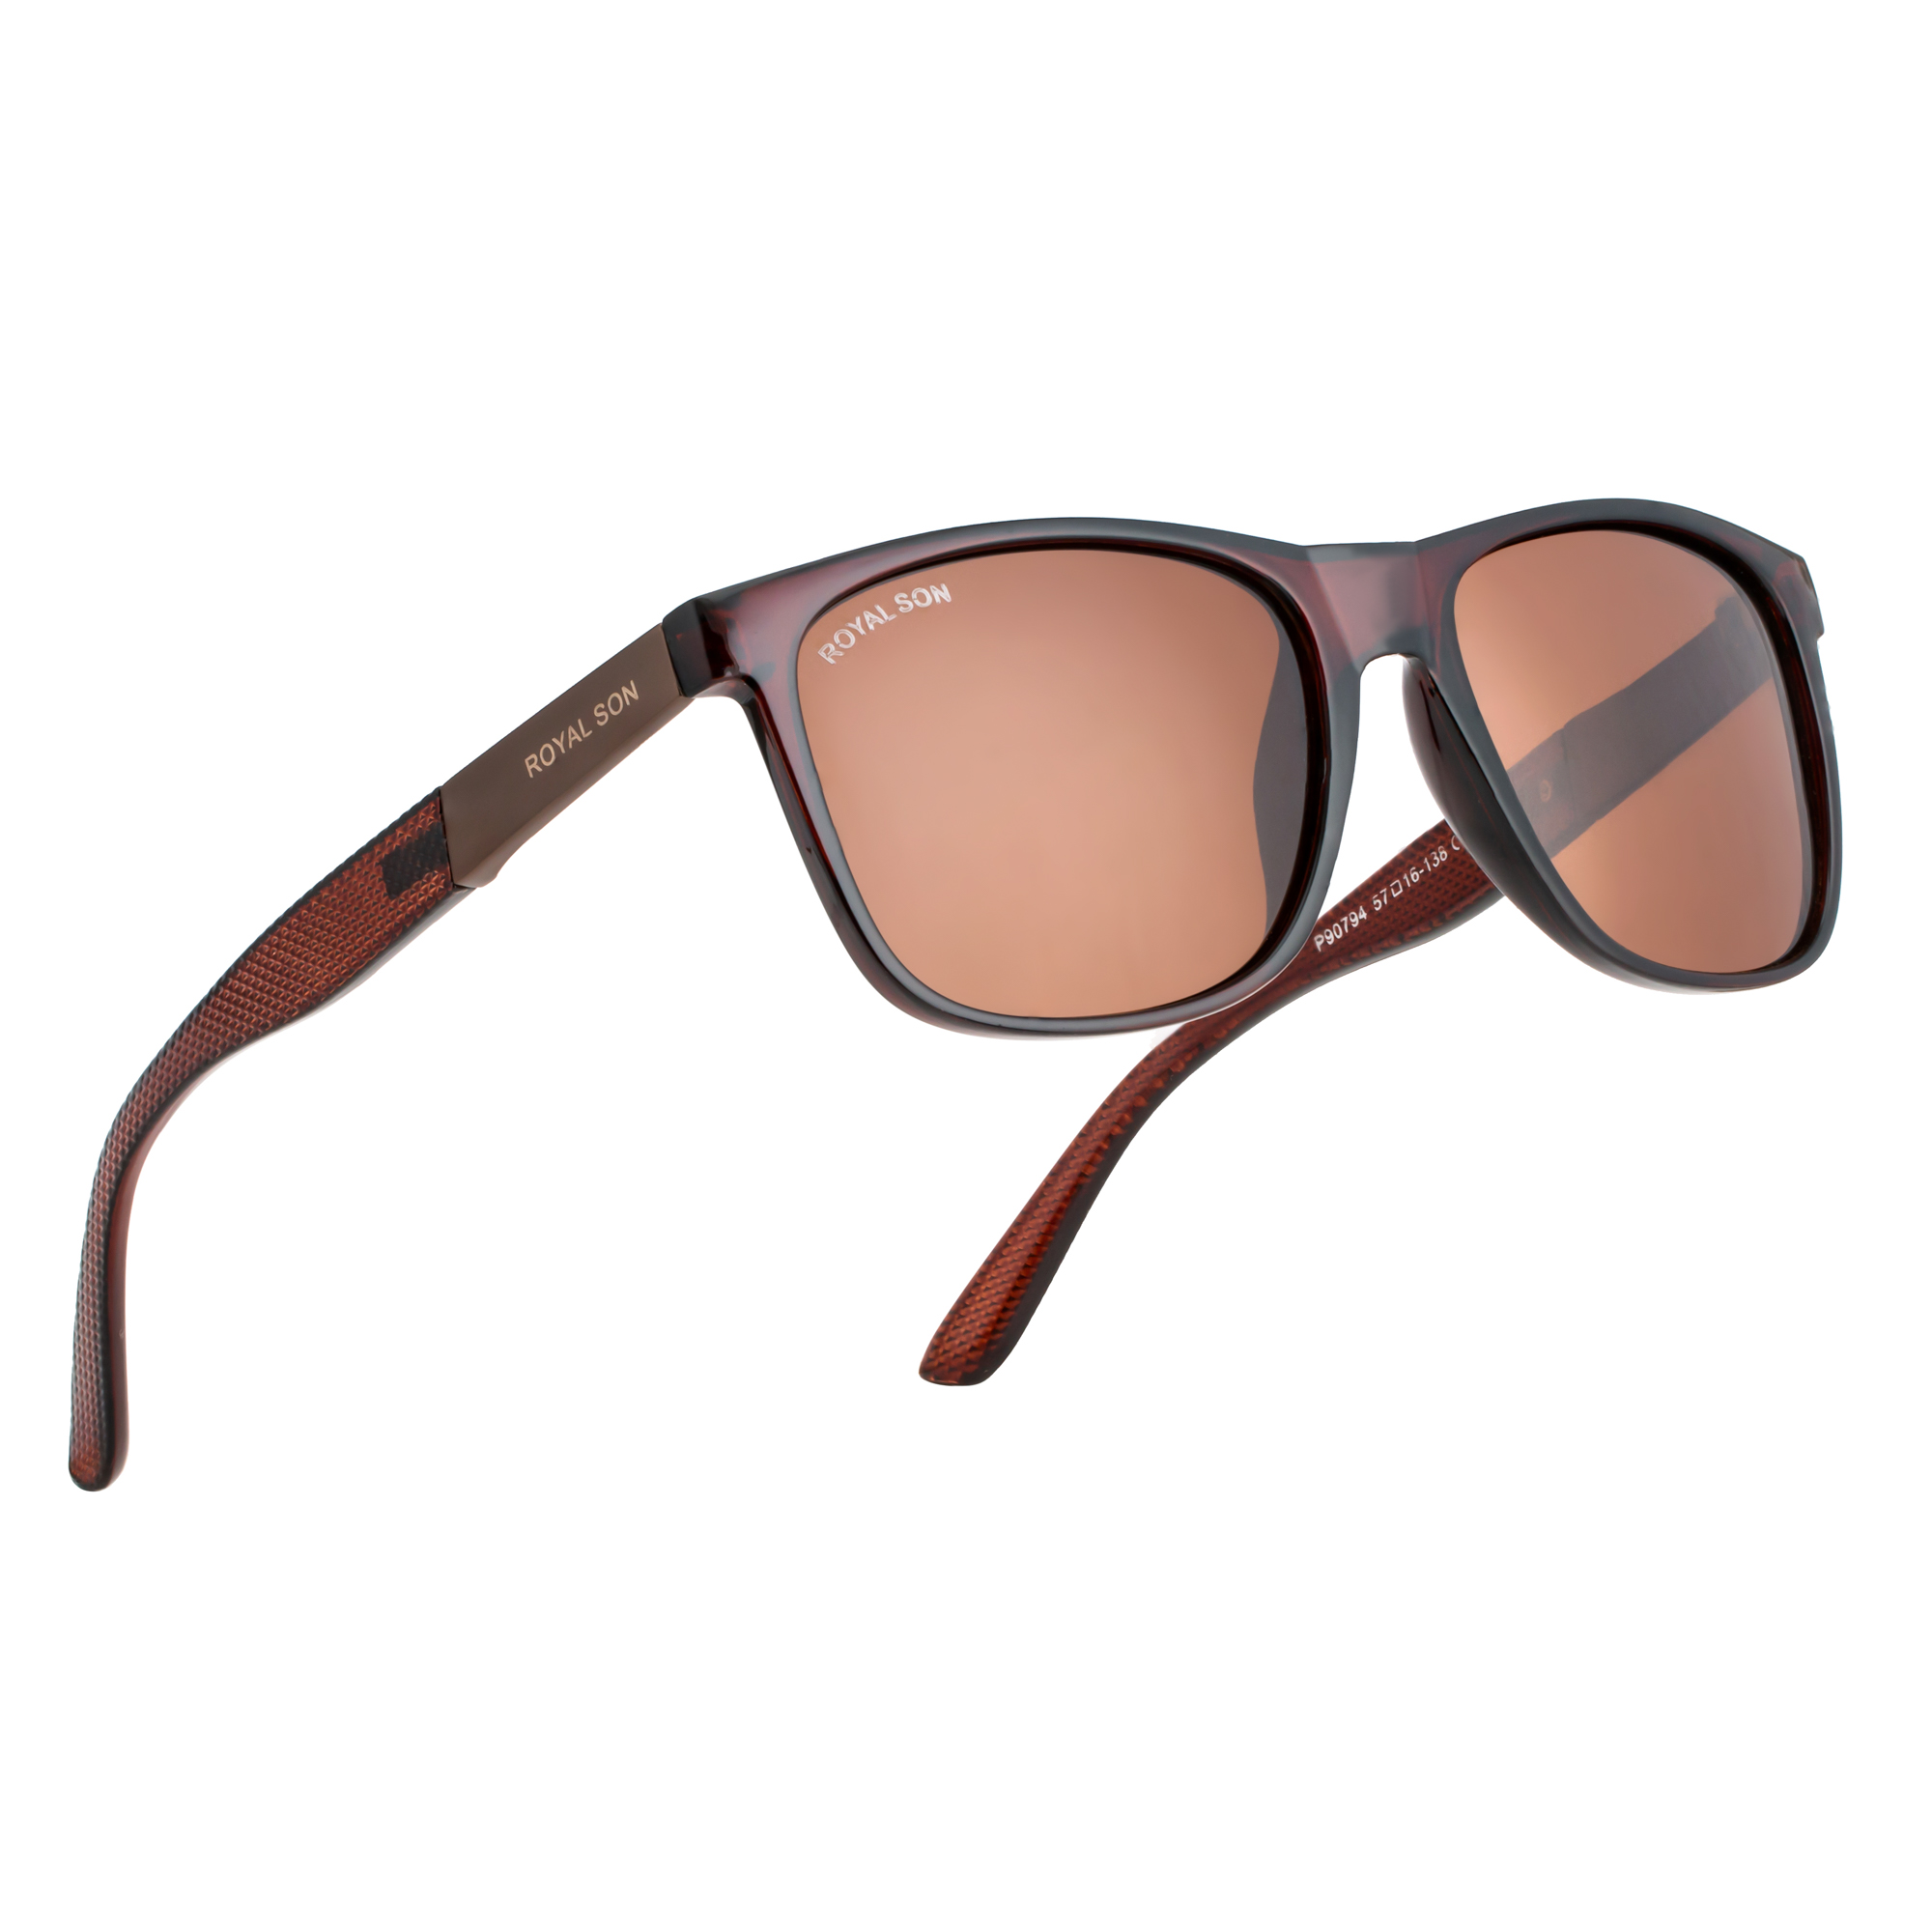 Royal Son Square UV Protection Polarized Sunglasses For Men and Women Brown - CHI00121-C2